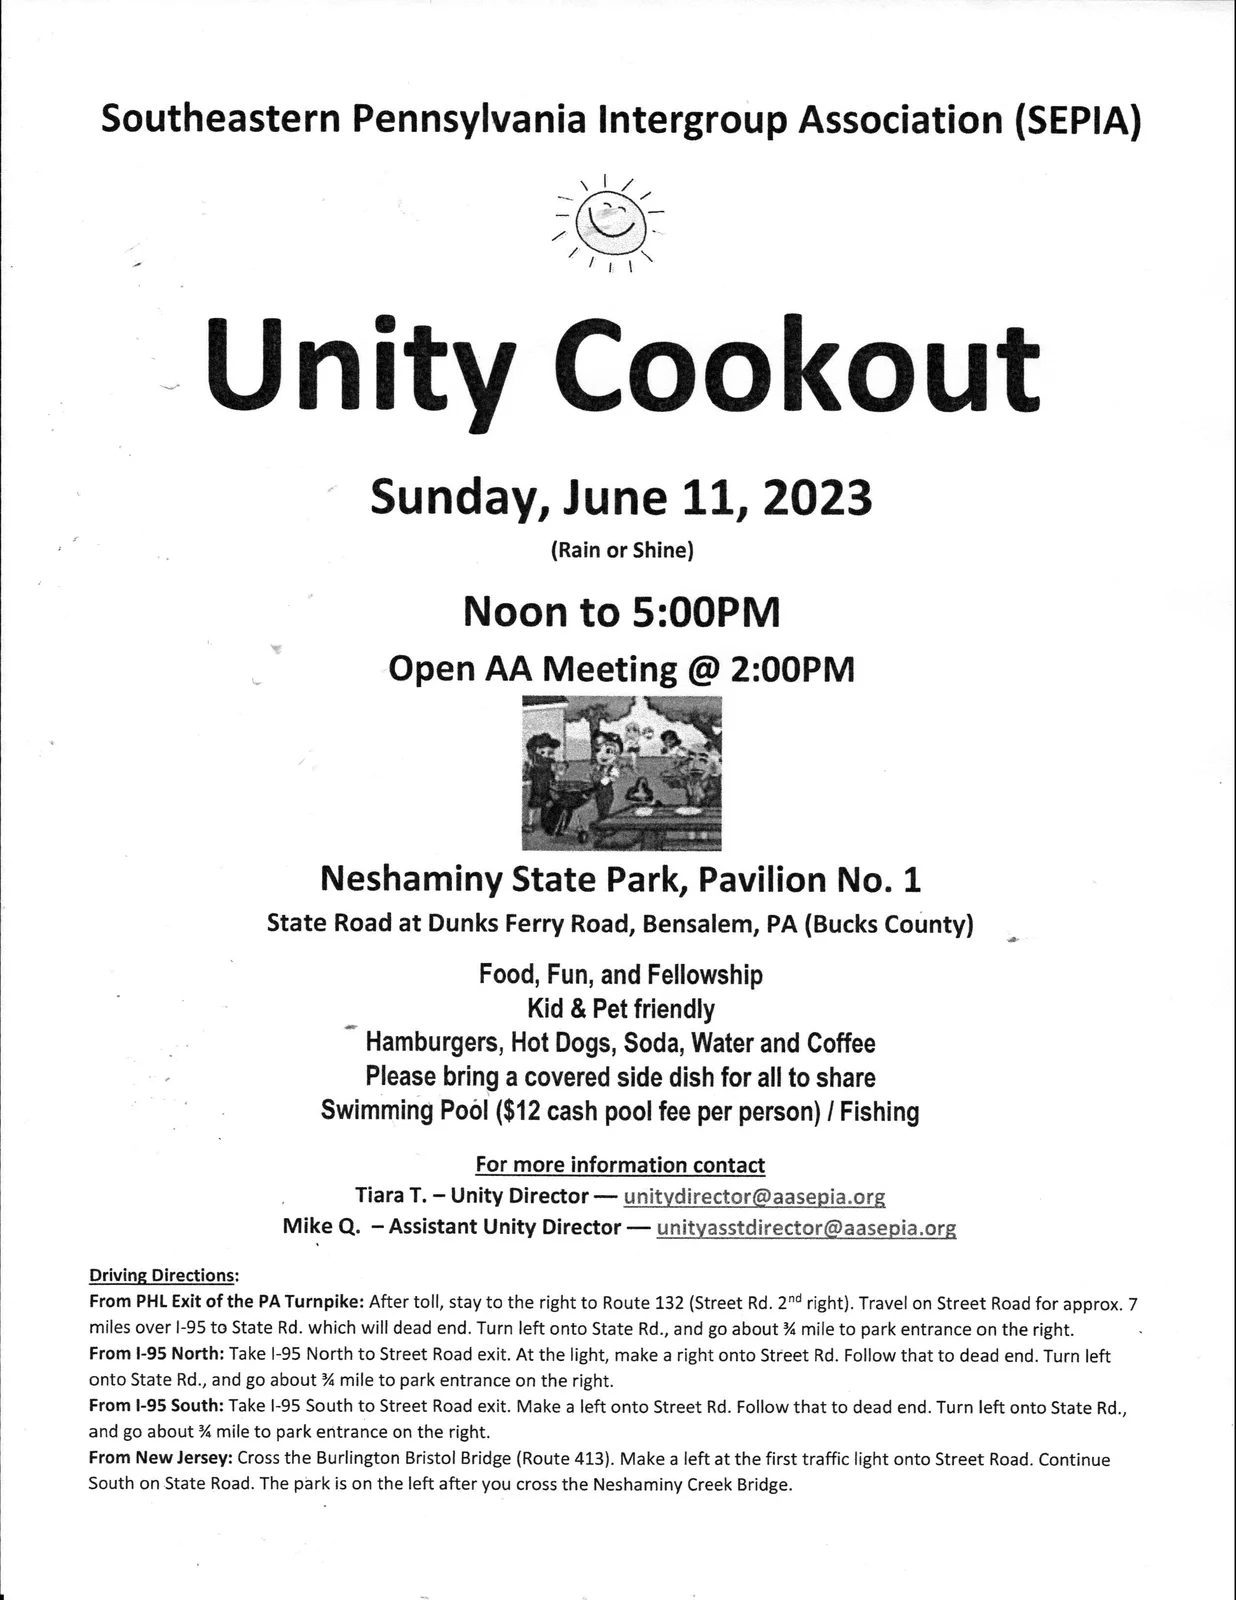 Unity Cookout 2023.jpg